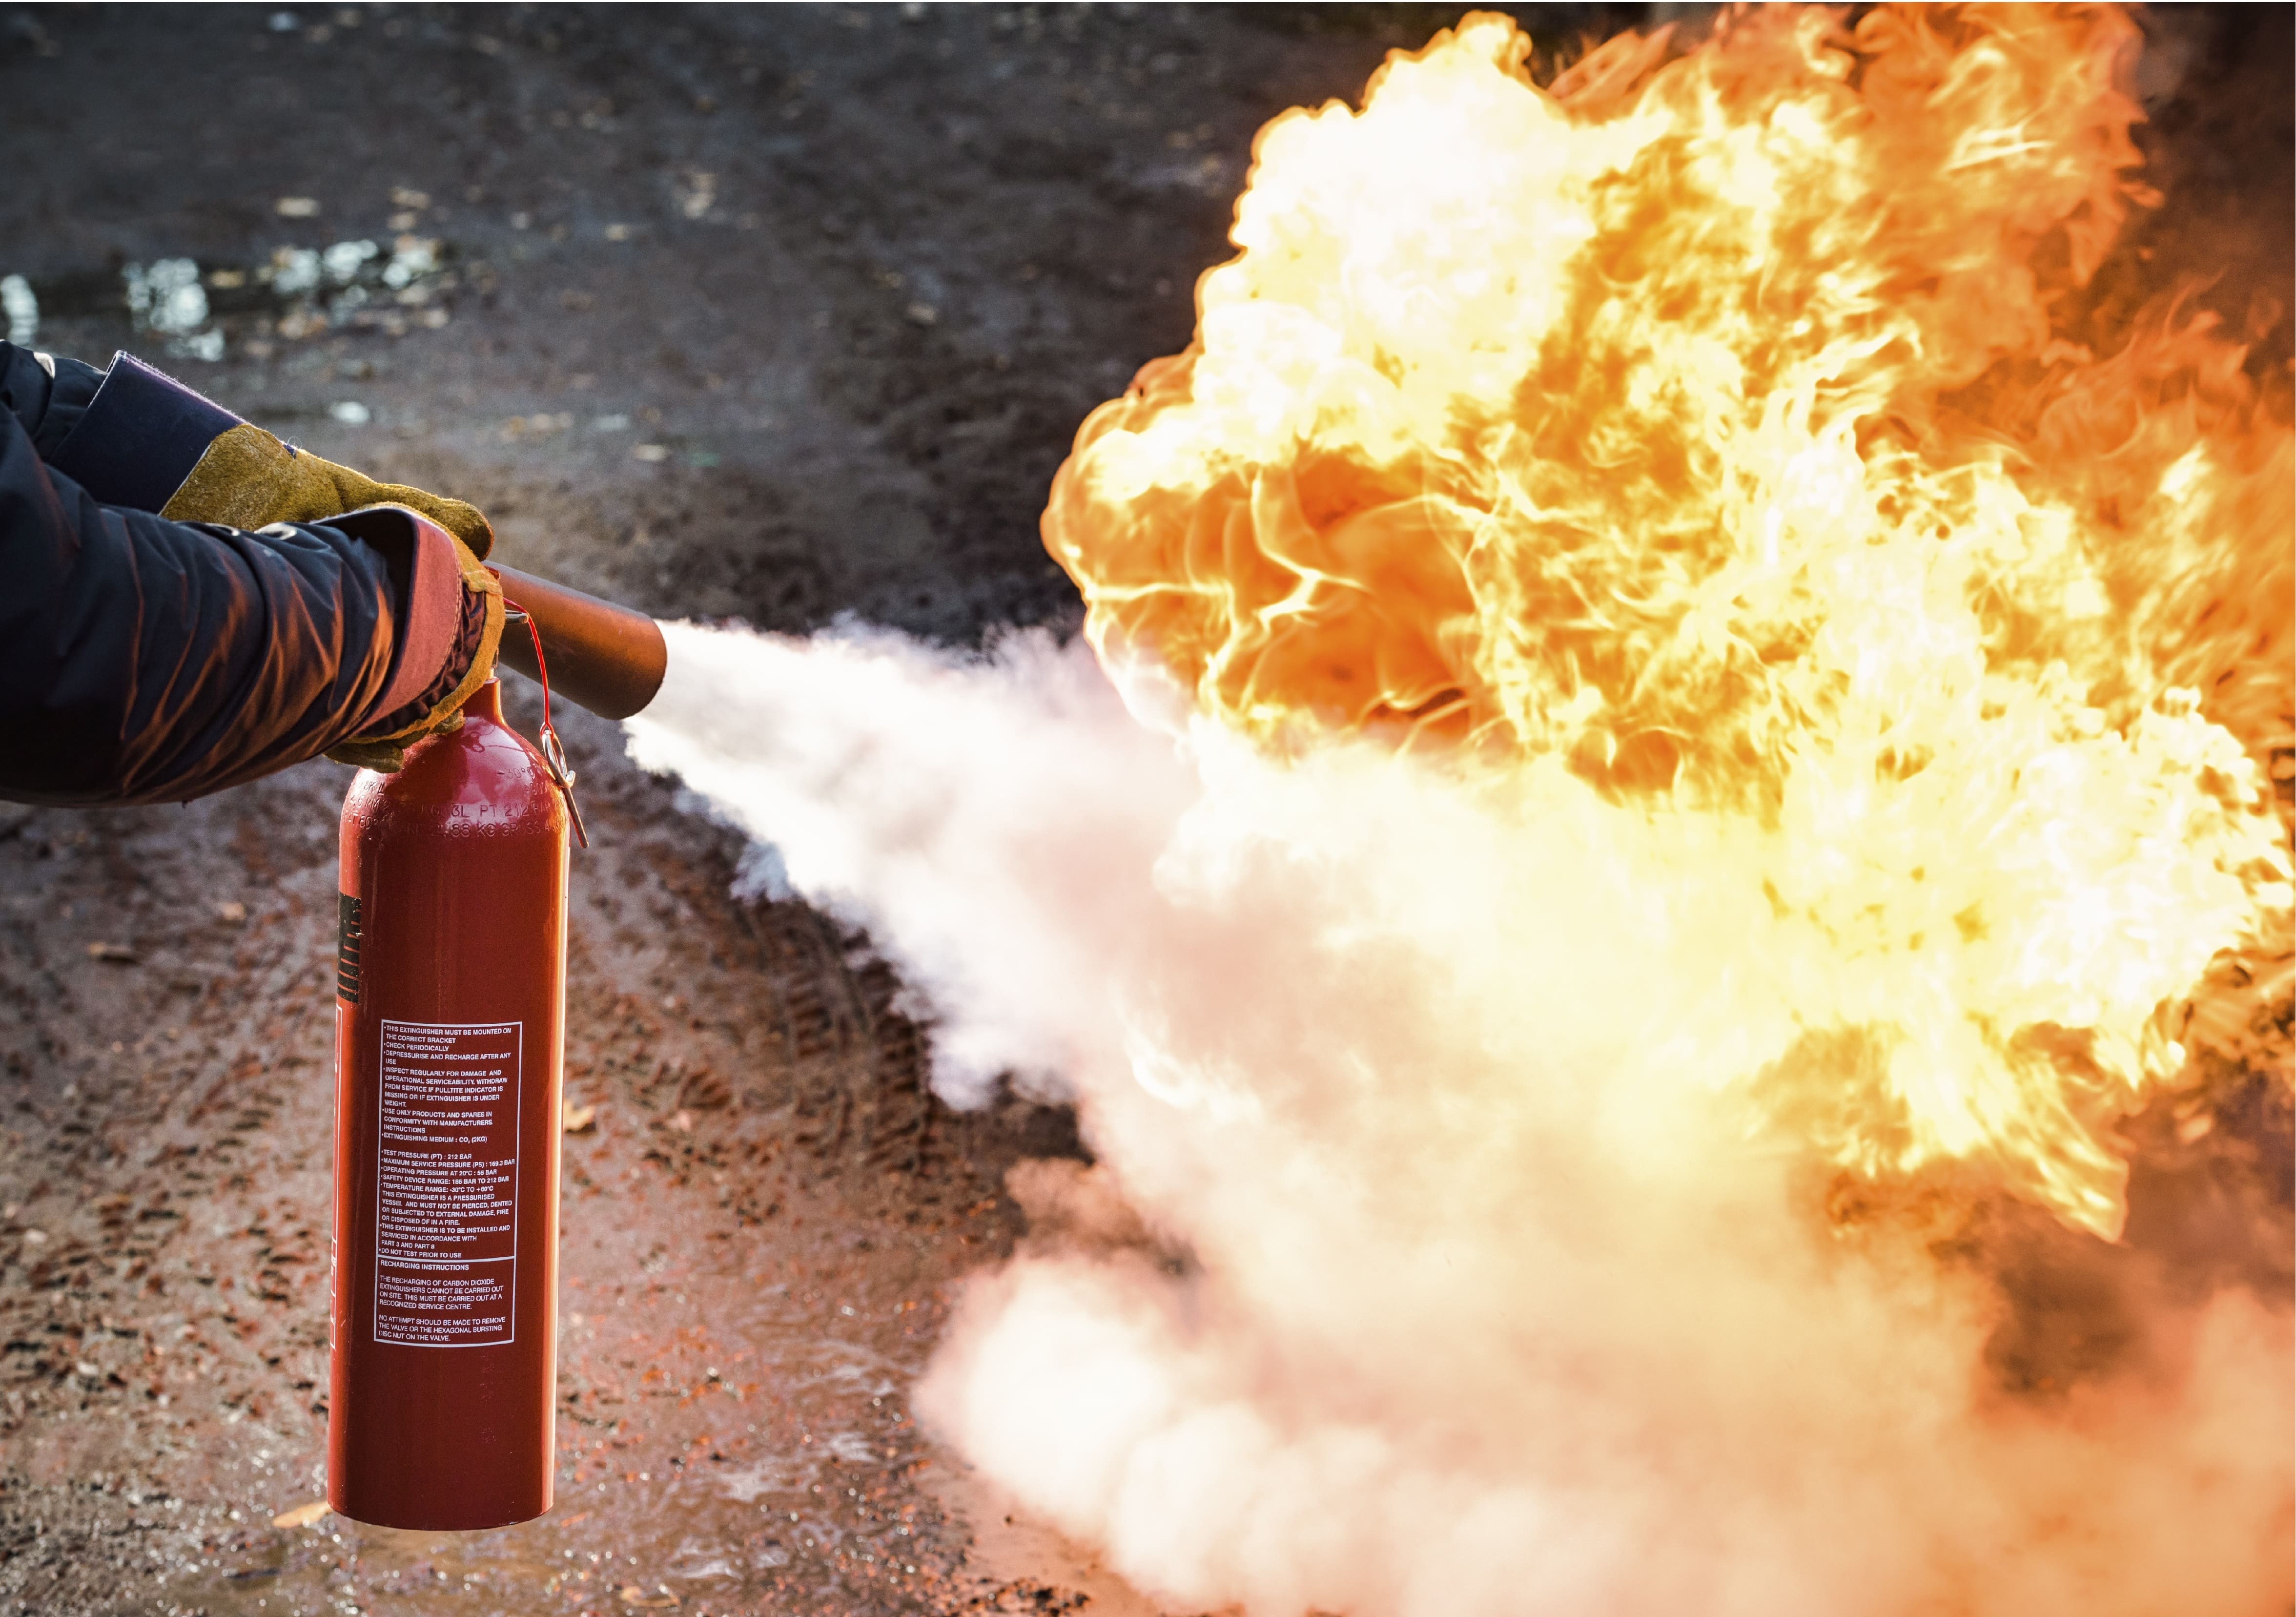 co2 fire extinguisher being used to fight fire